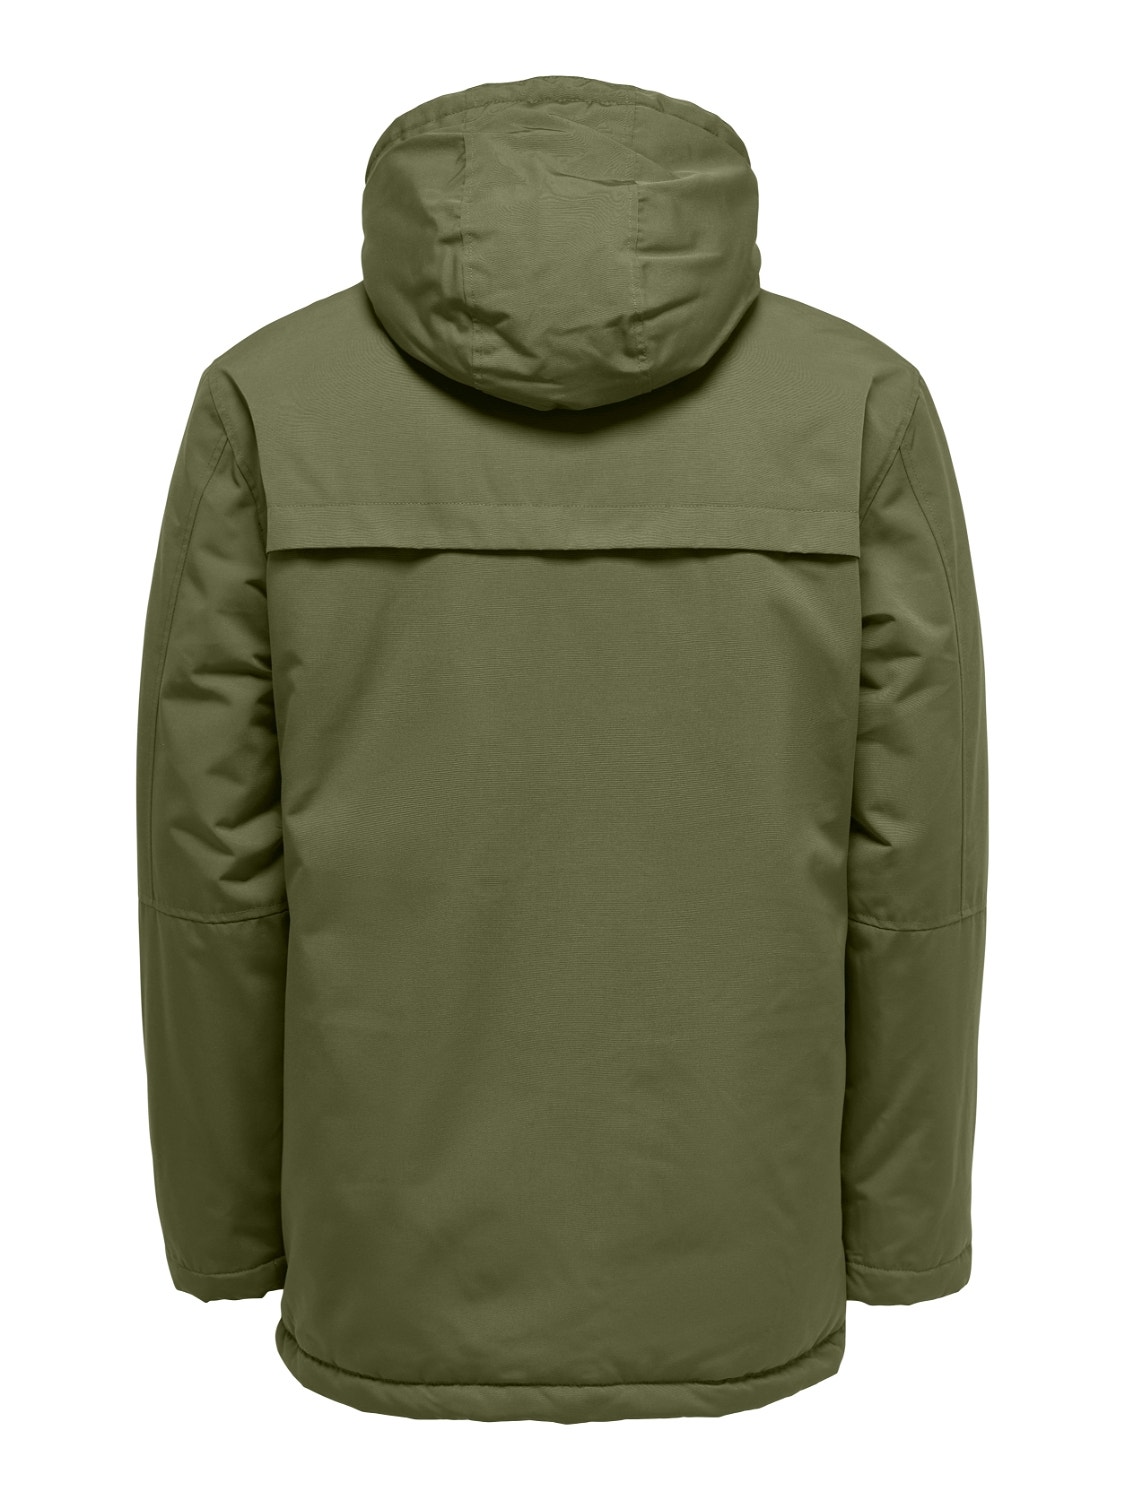 ONLY & SONS Hood with string regulation Storm cuffs to prevent wind from entering Jacket -Winter Moss - 22022654